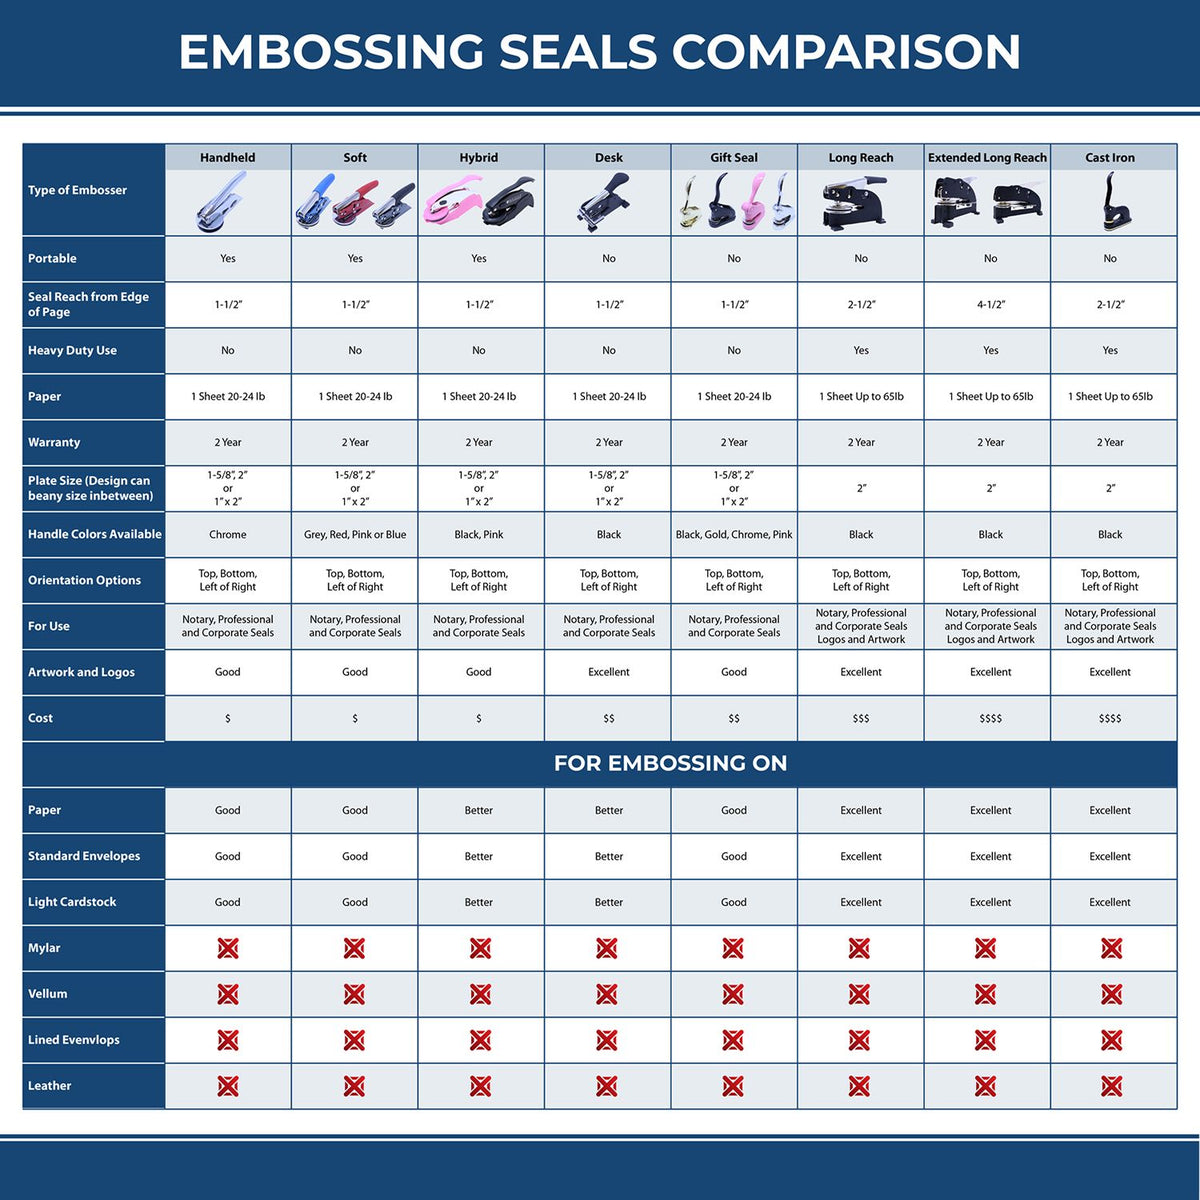 A comparison chart for the different types of mount models available for the Heavy Duty Cast Iron Montana Land Surveyor Seal Embosser.